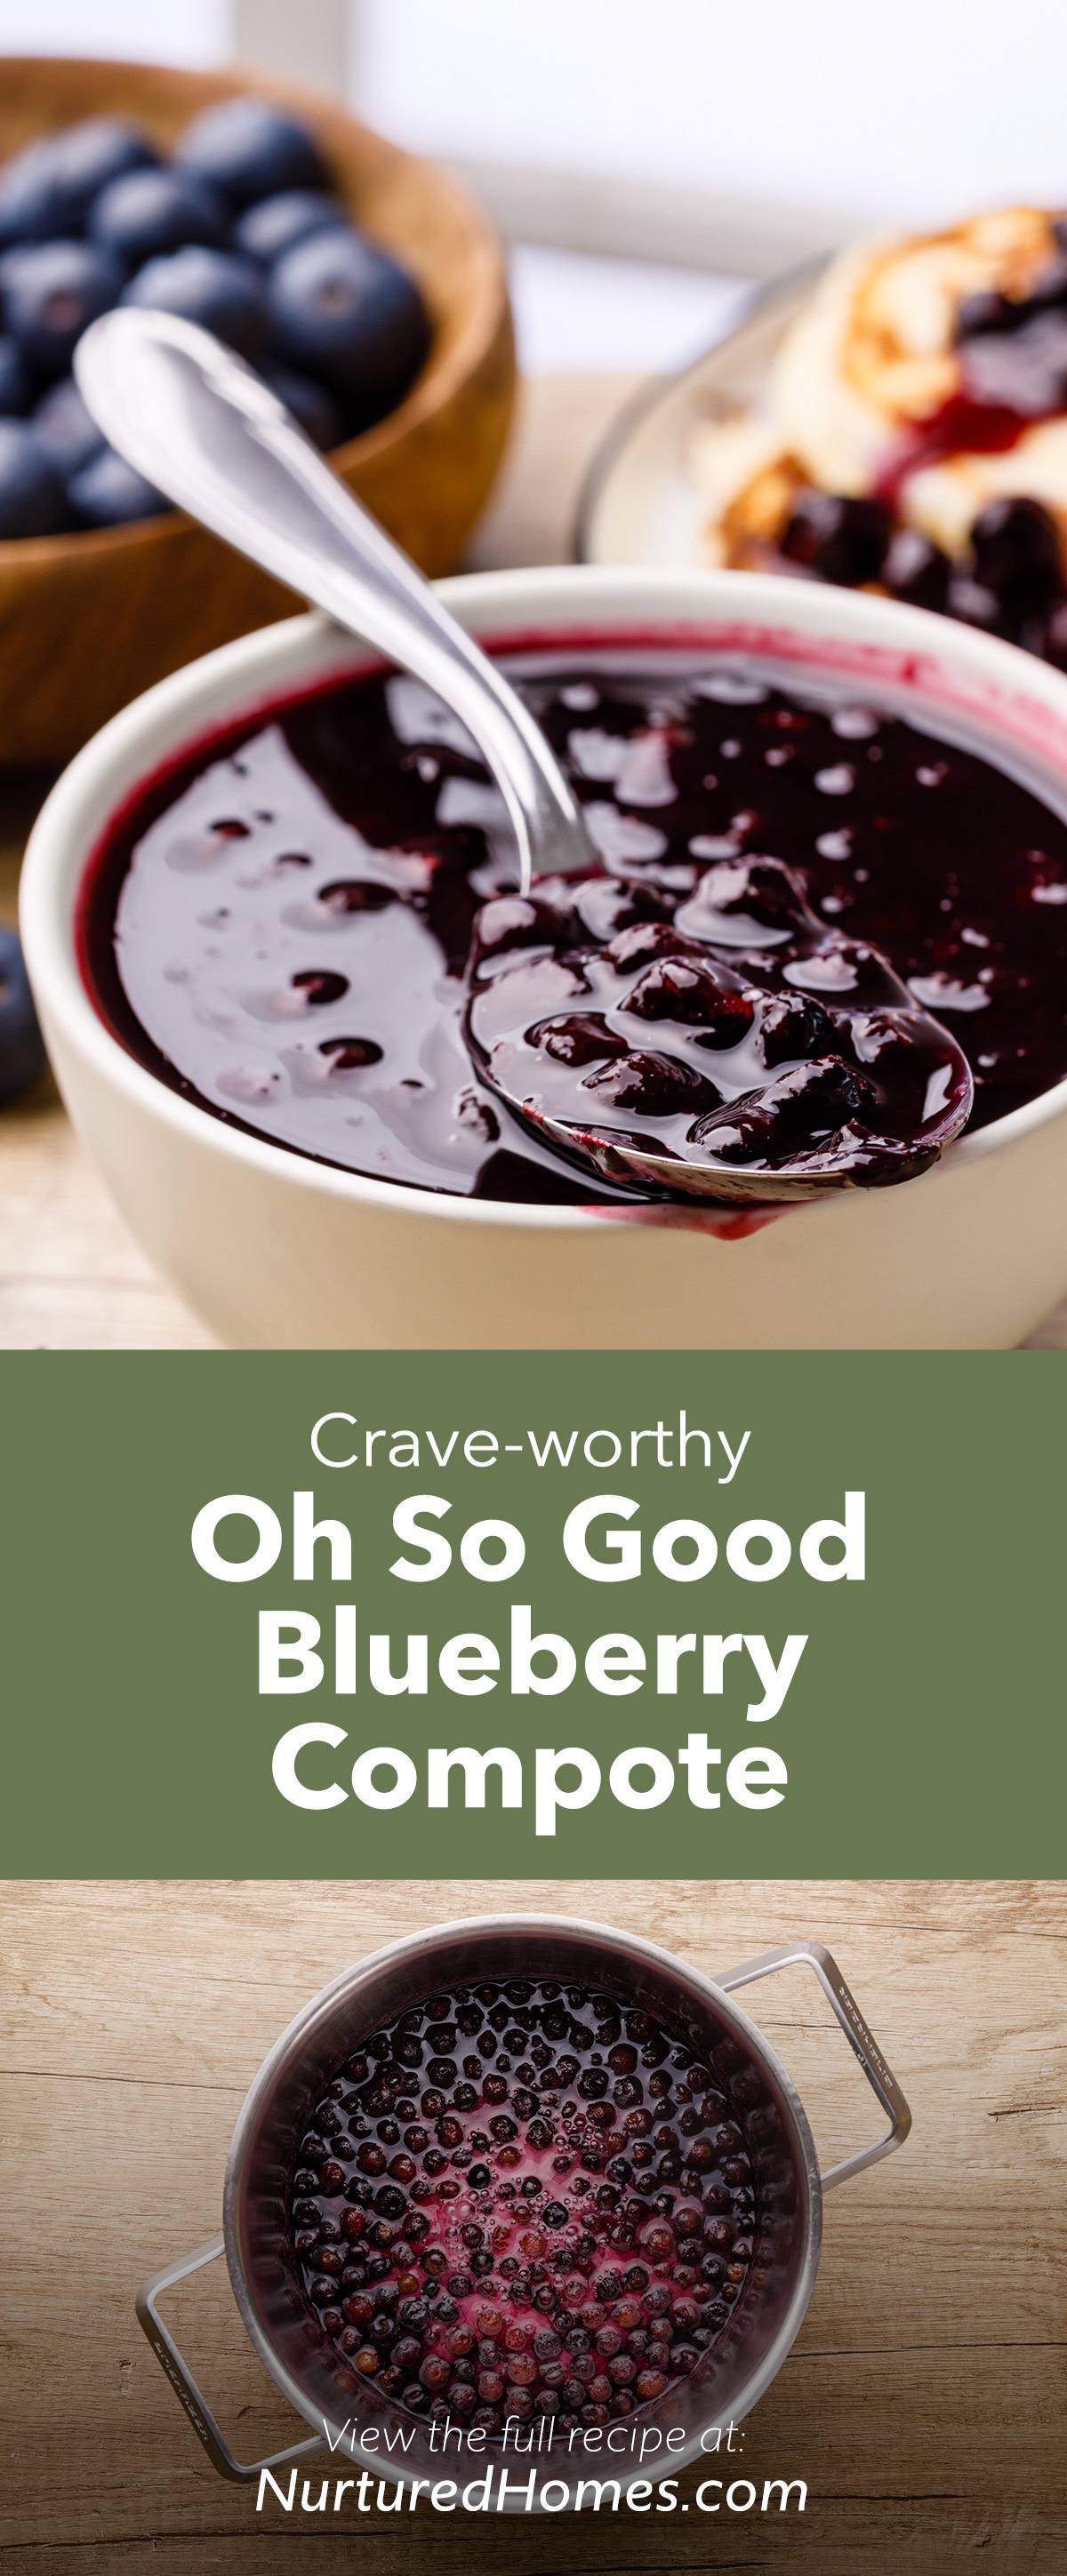 Blueberrry Compote